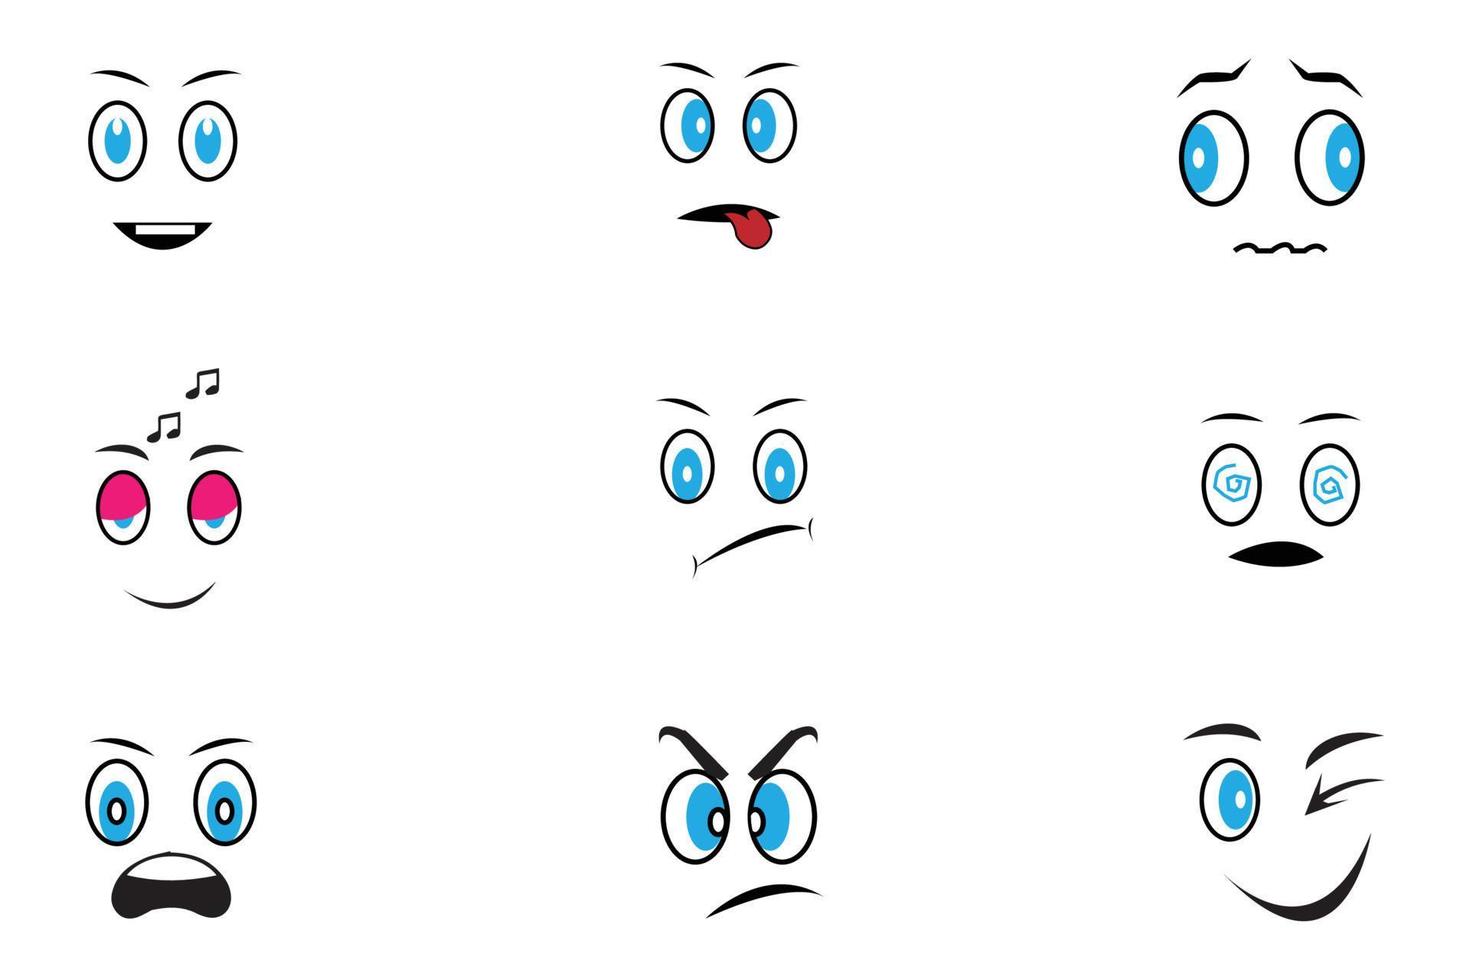 Cartoon faces. Expressive eyes and mouth, smiling, crying and surprised character face expressions. Illustration. vector